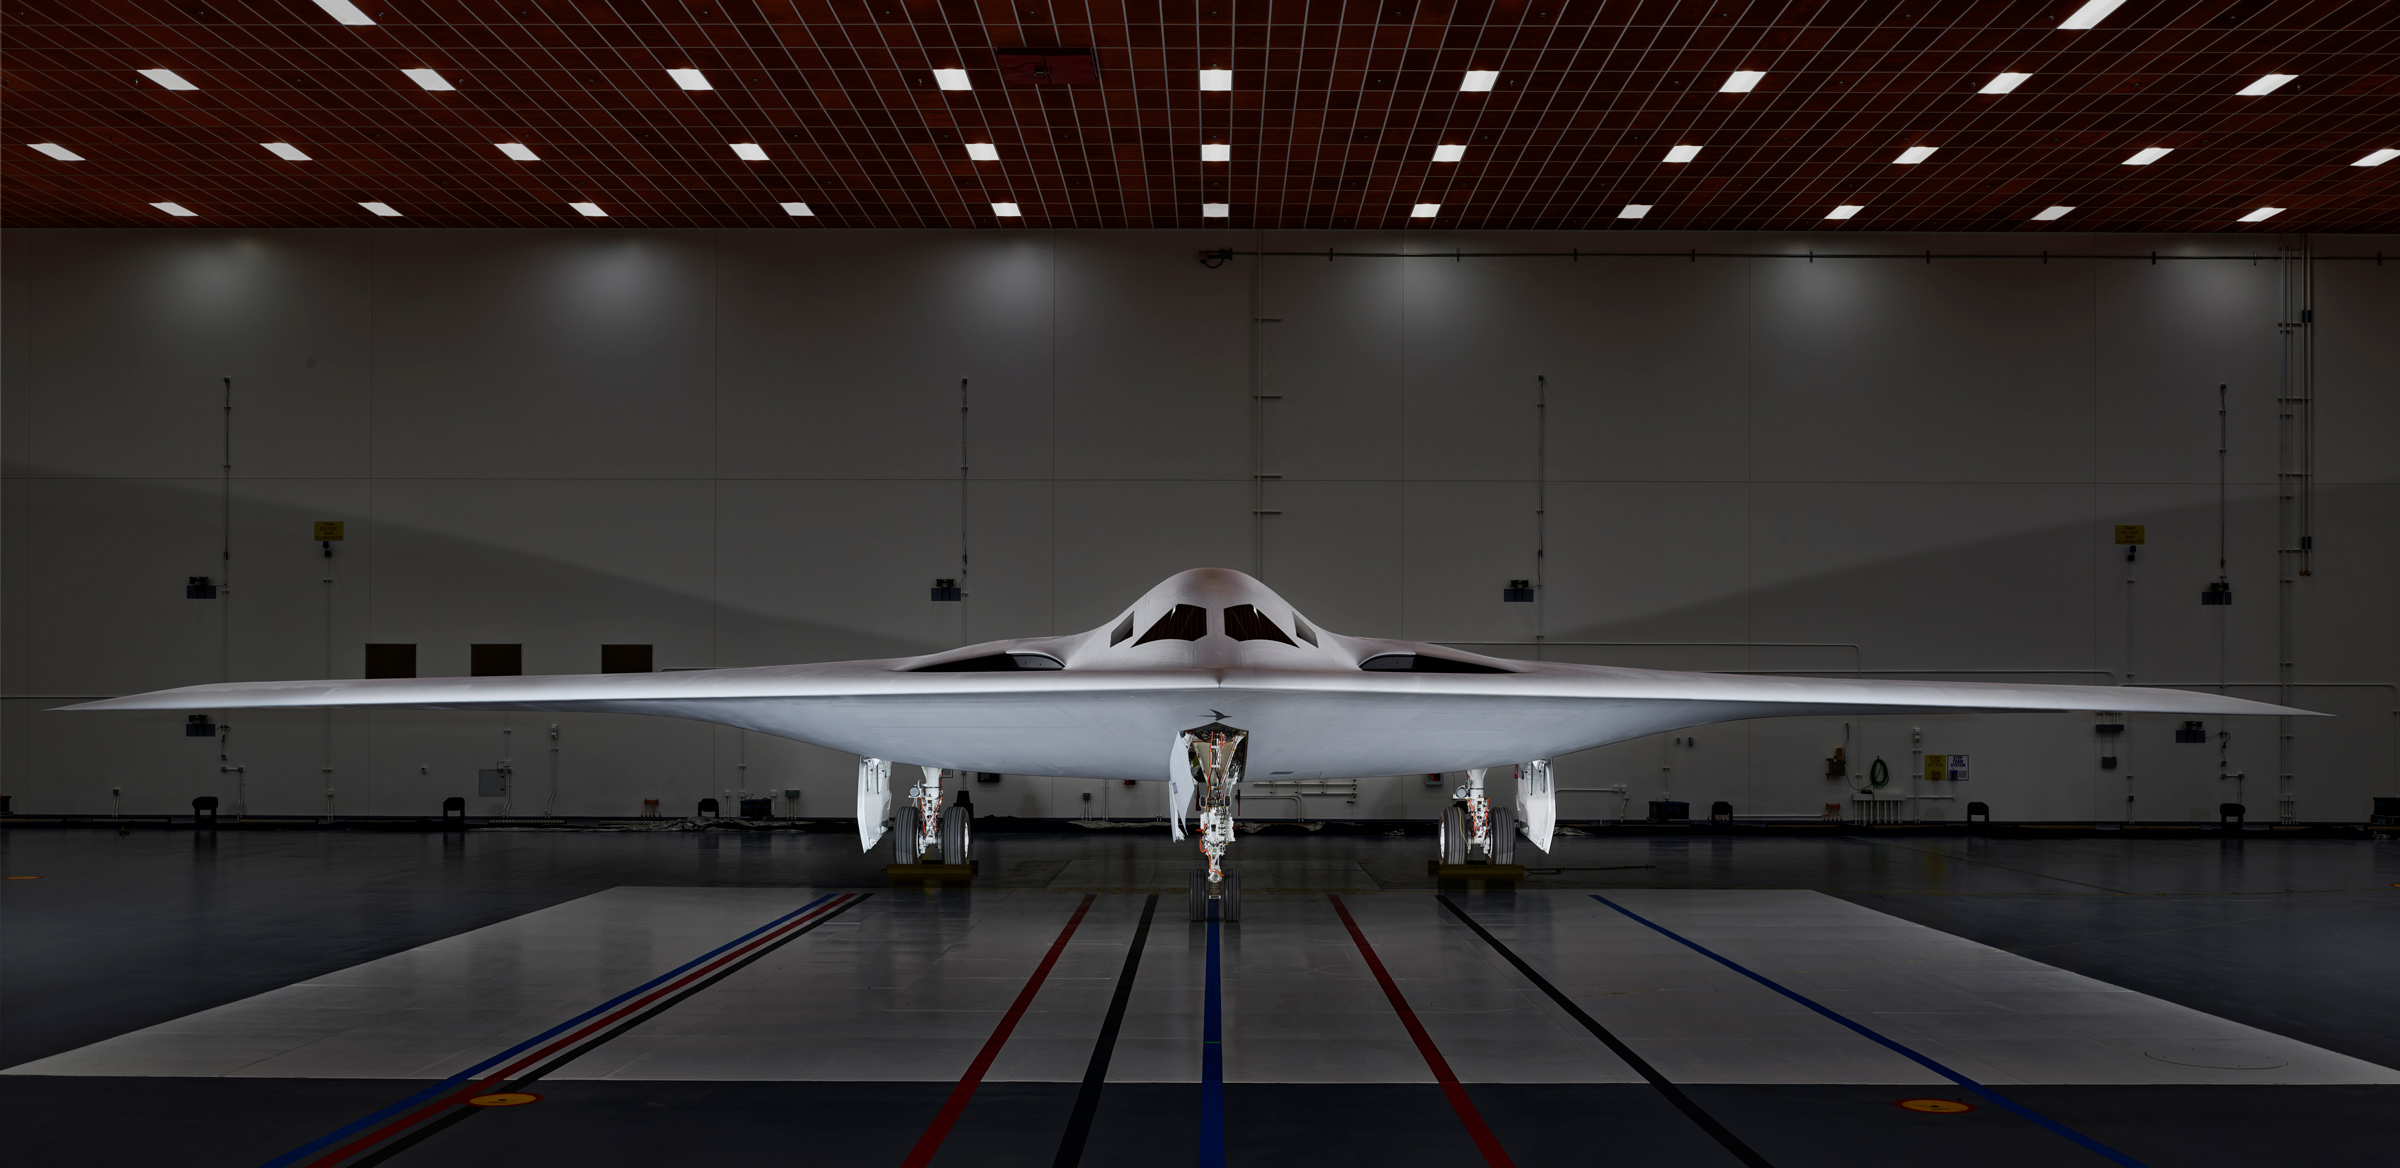 The <a href="https://time.com/6238168/b-21-raider-bomber-us-military-exclusive/">B-21 stealth bomber</a>—the U.S. military’s newest covert aircraft—sits inside a hangar at Northrop Grumman’s facilities at Plant 42 in Palmdale before its Dec. 2 public unveiling, on Nov. 29. (Christopher Payne for TIME)